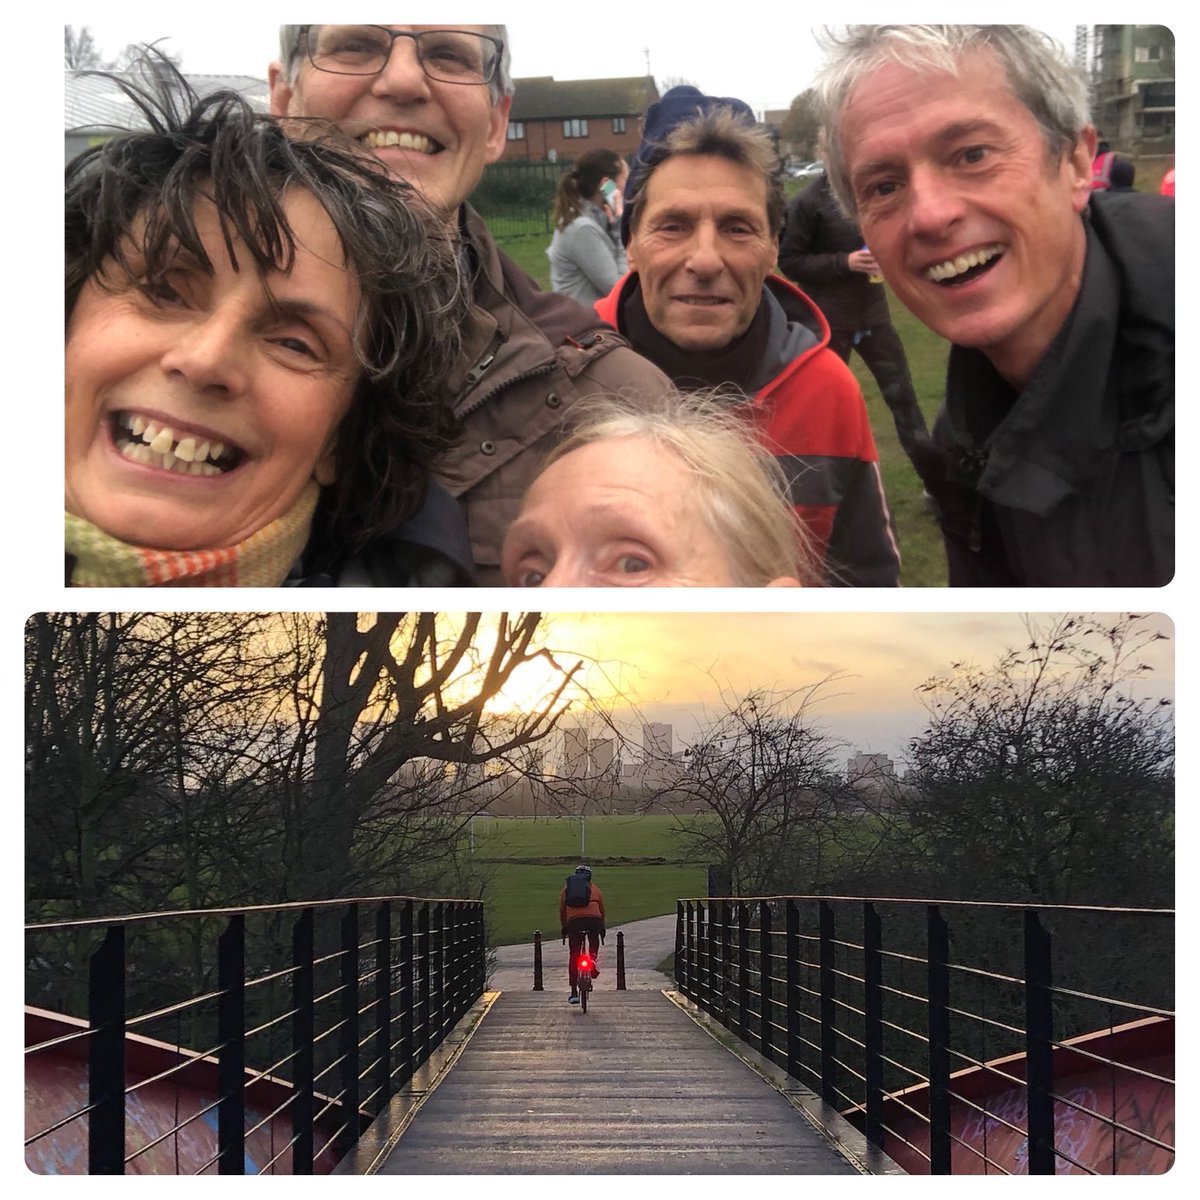 On leave this week 😃 bit tired recovering from lurgy but 2x 5km chatty runs including a windy very muddy ⁦@wansteadparkrun⁩ 2 lovely walks with lunch 😉 (10 mile total) a 🏊🏼‍♀️ and a few cycle miles getting there  across #HackneyMarshes! #NHS1000miles